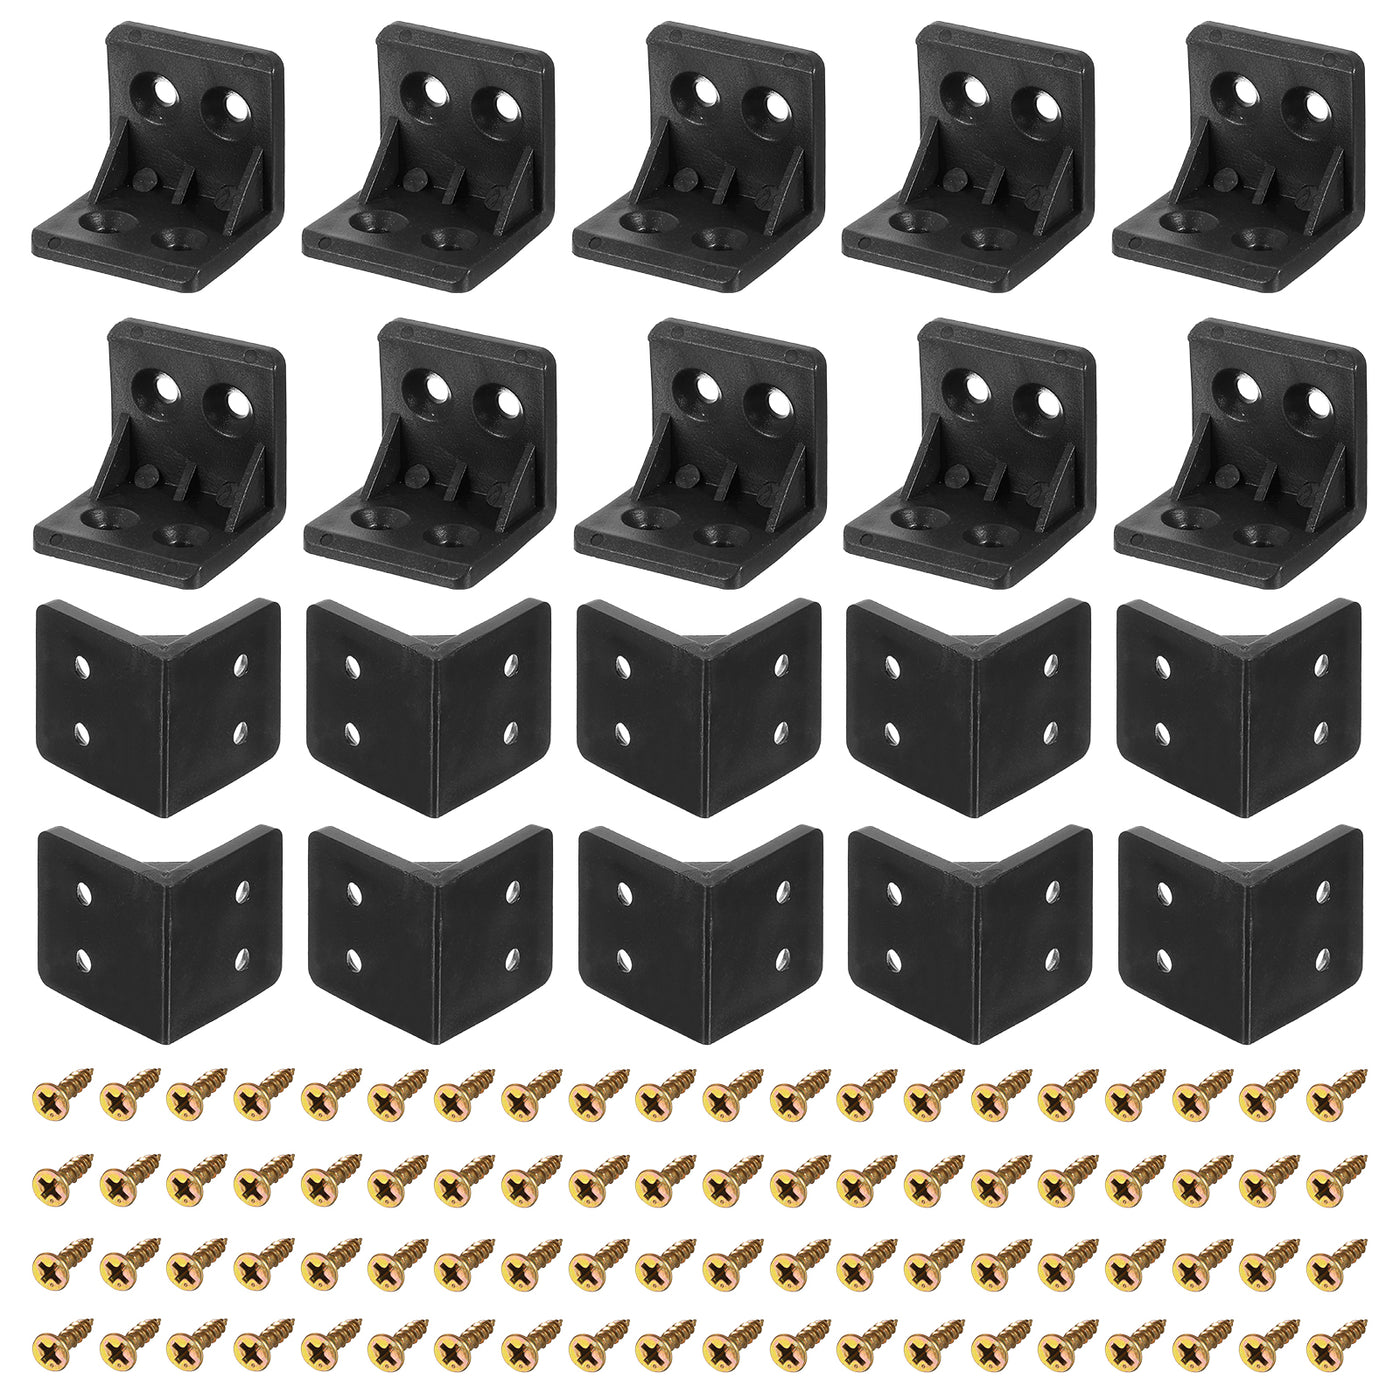 uxcell Uxcell 30Pcs 90 Degree Plastic Corner Braces, 27.3x27x27mm Nylon Shelf Right Angle Brackets with Screws for Cabinets, Cupboards (Black)